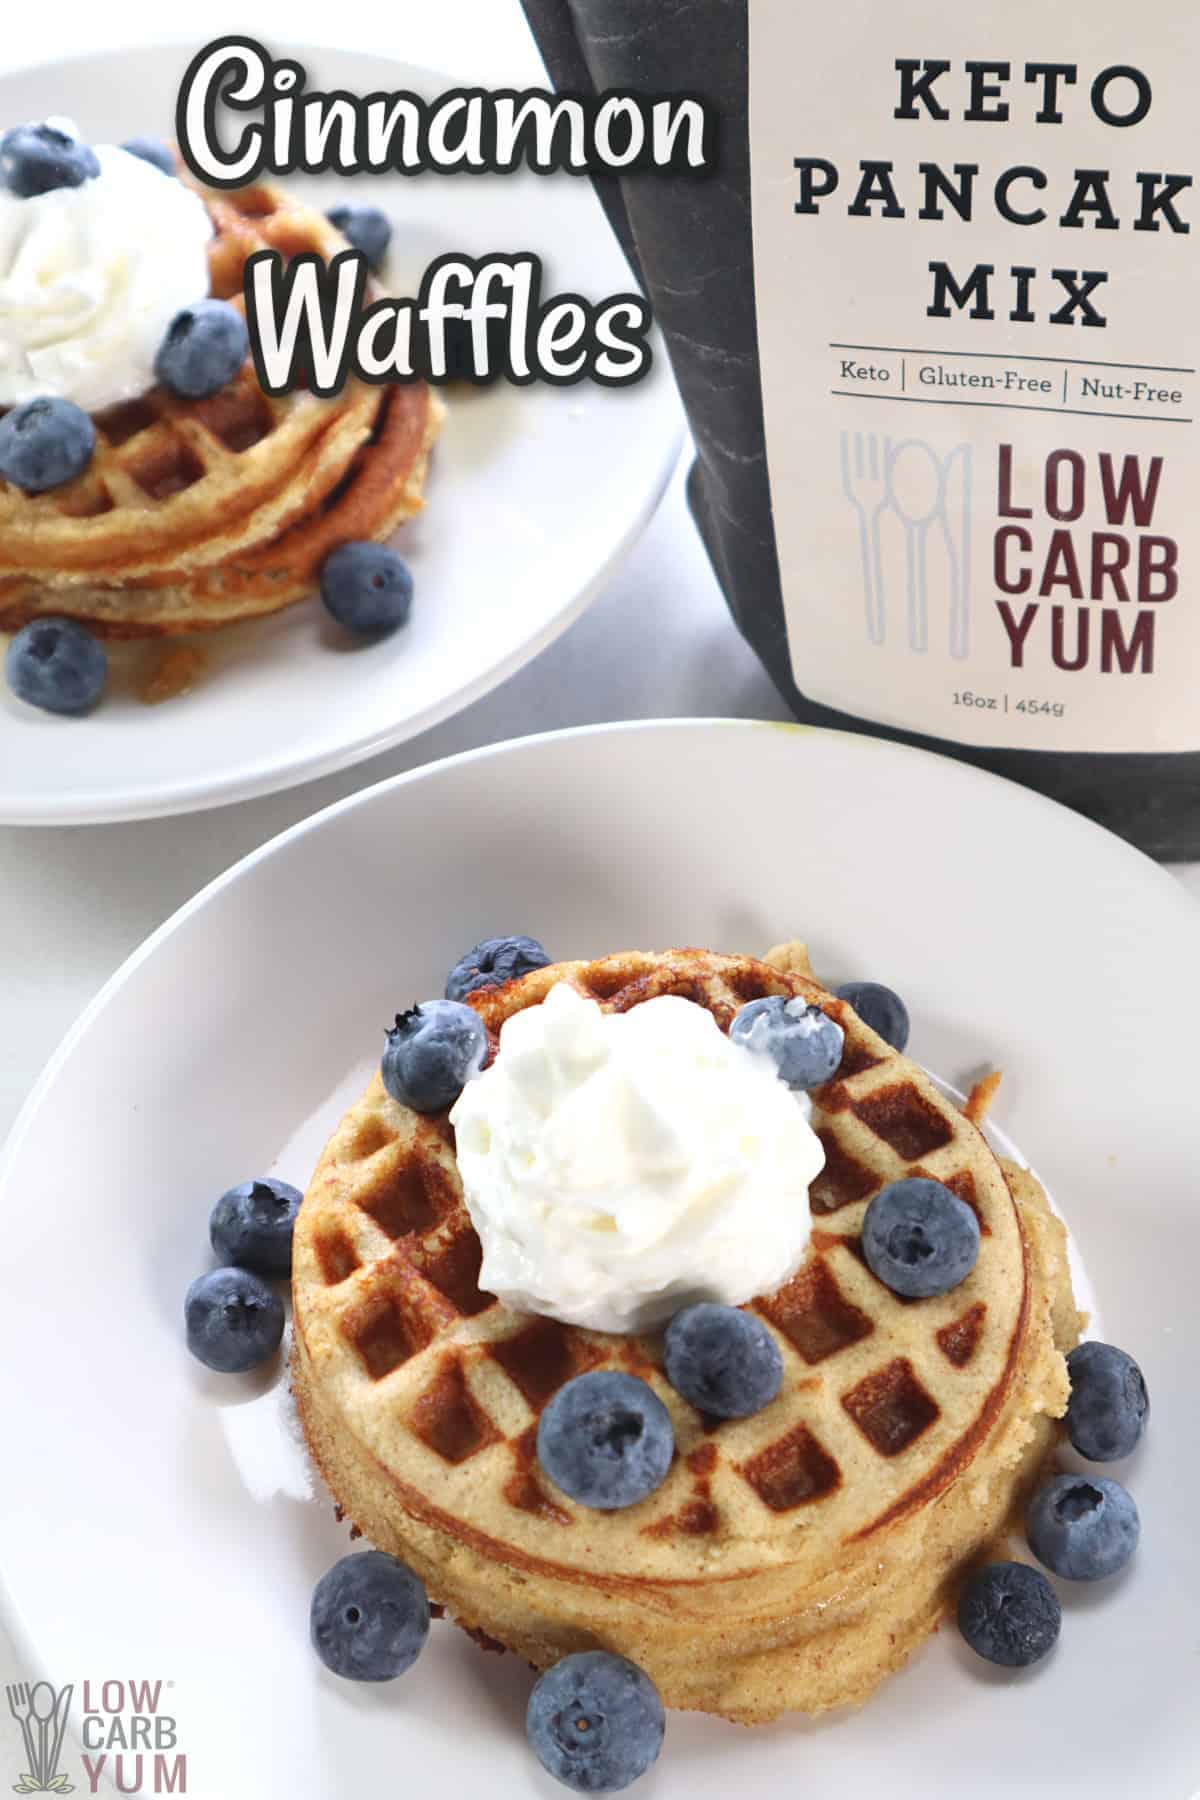 cinnamon waffles with pancake mix cover image